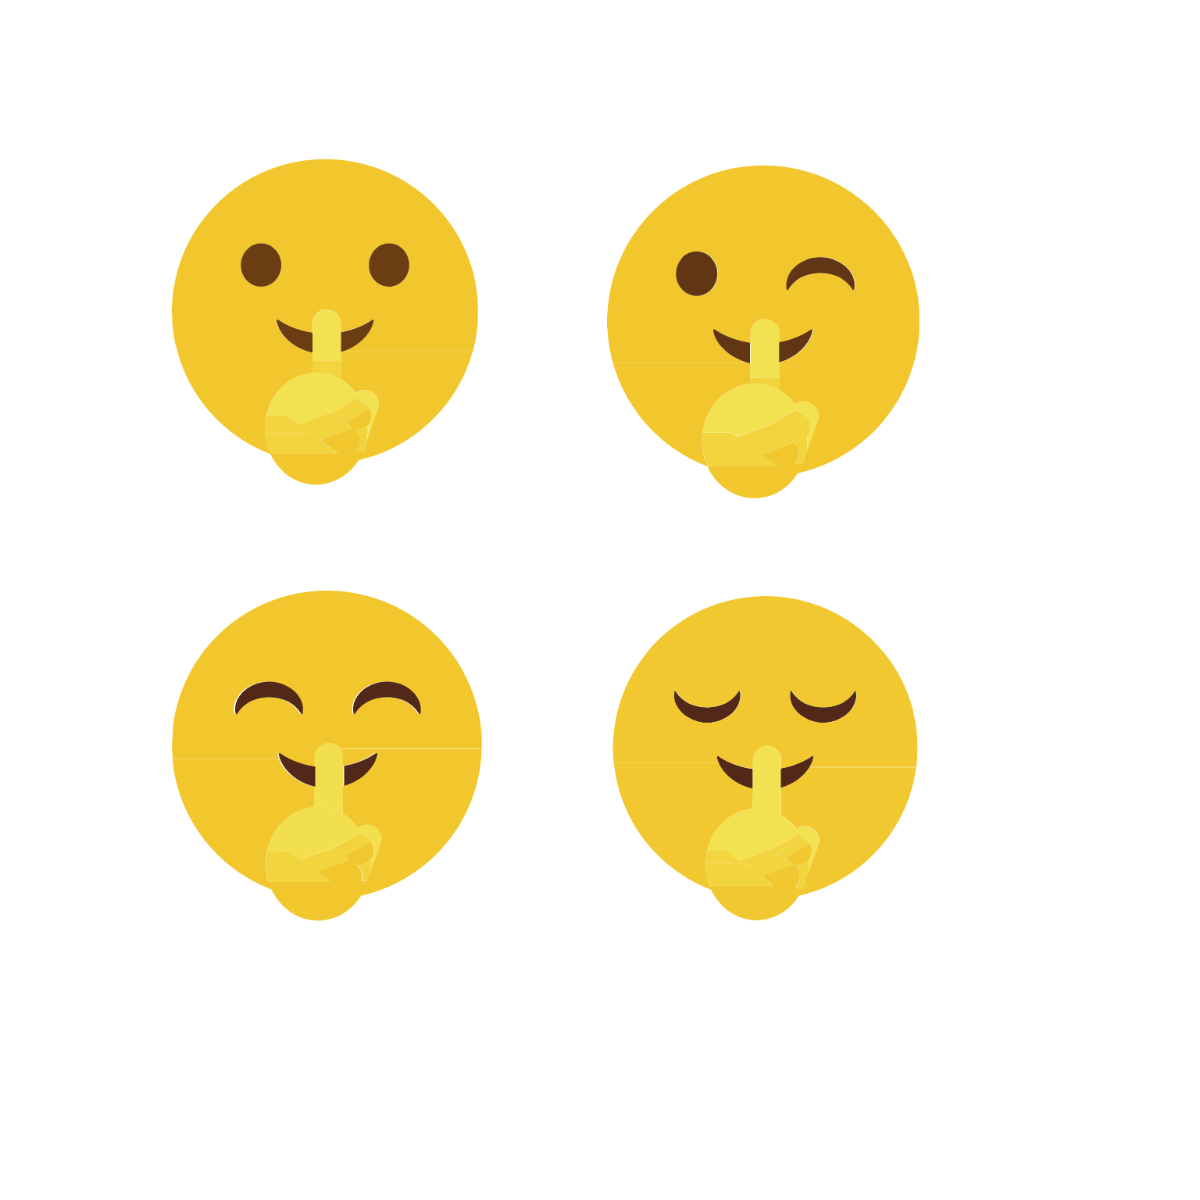 Free Shh Smiley Vector Template